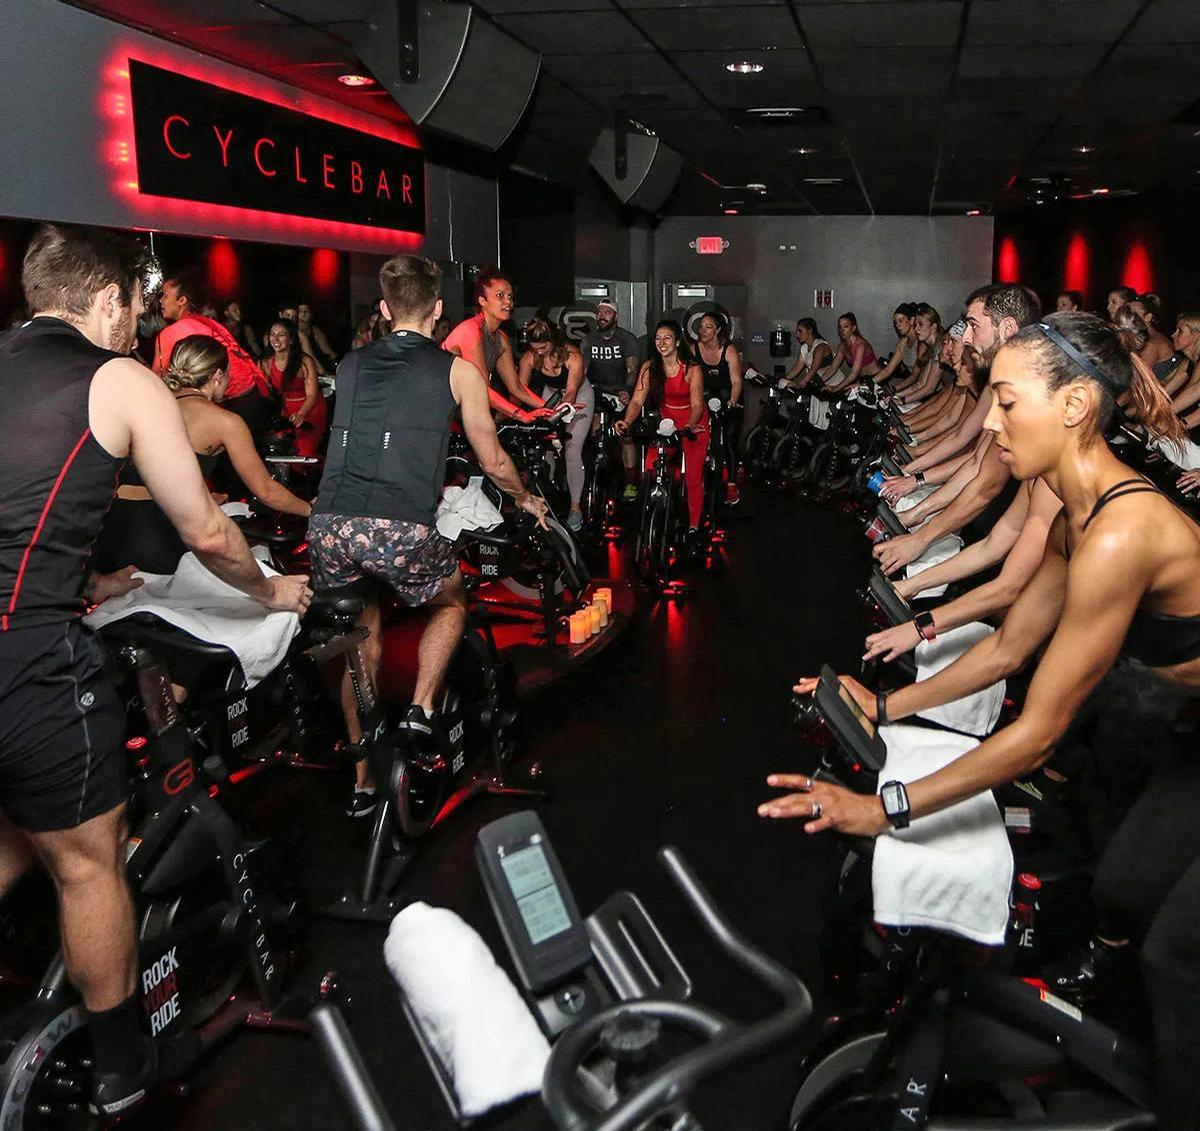 Xponential's portfolio of franchised boutique fitness brands include CycleBar / Xponential Fitness